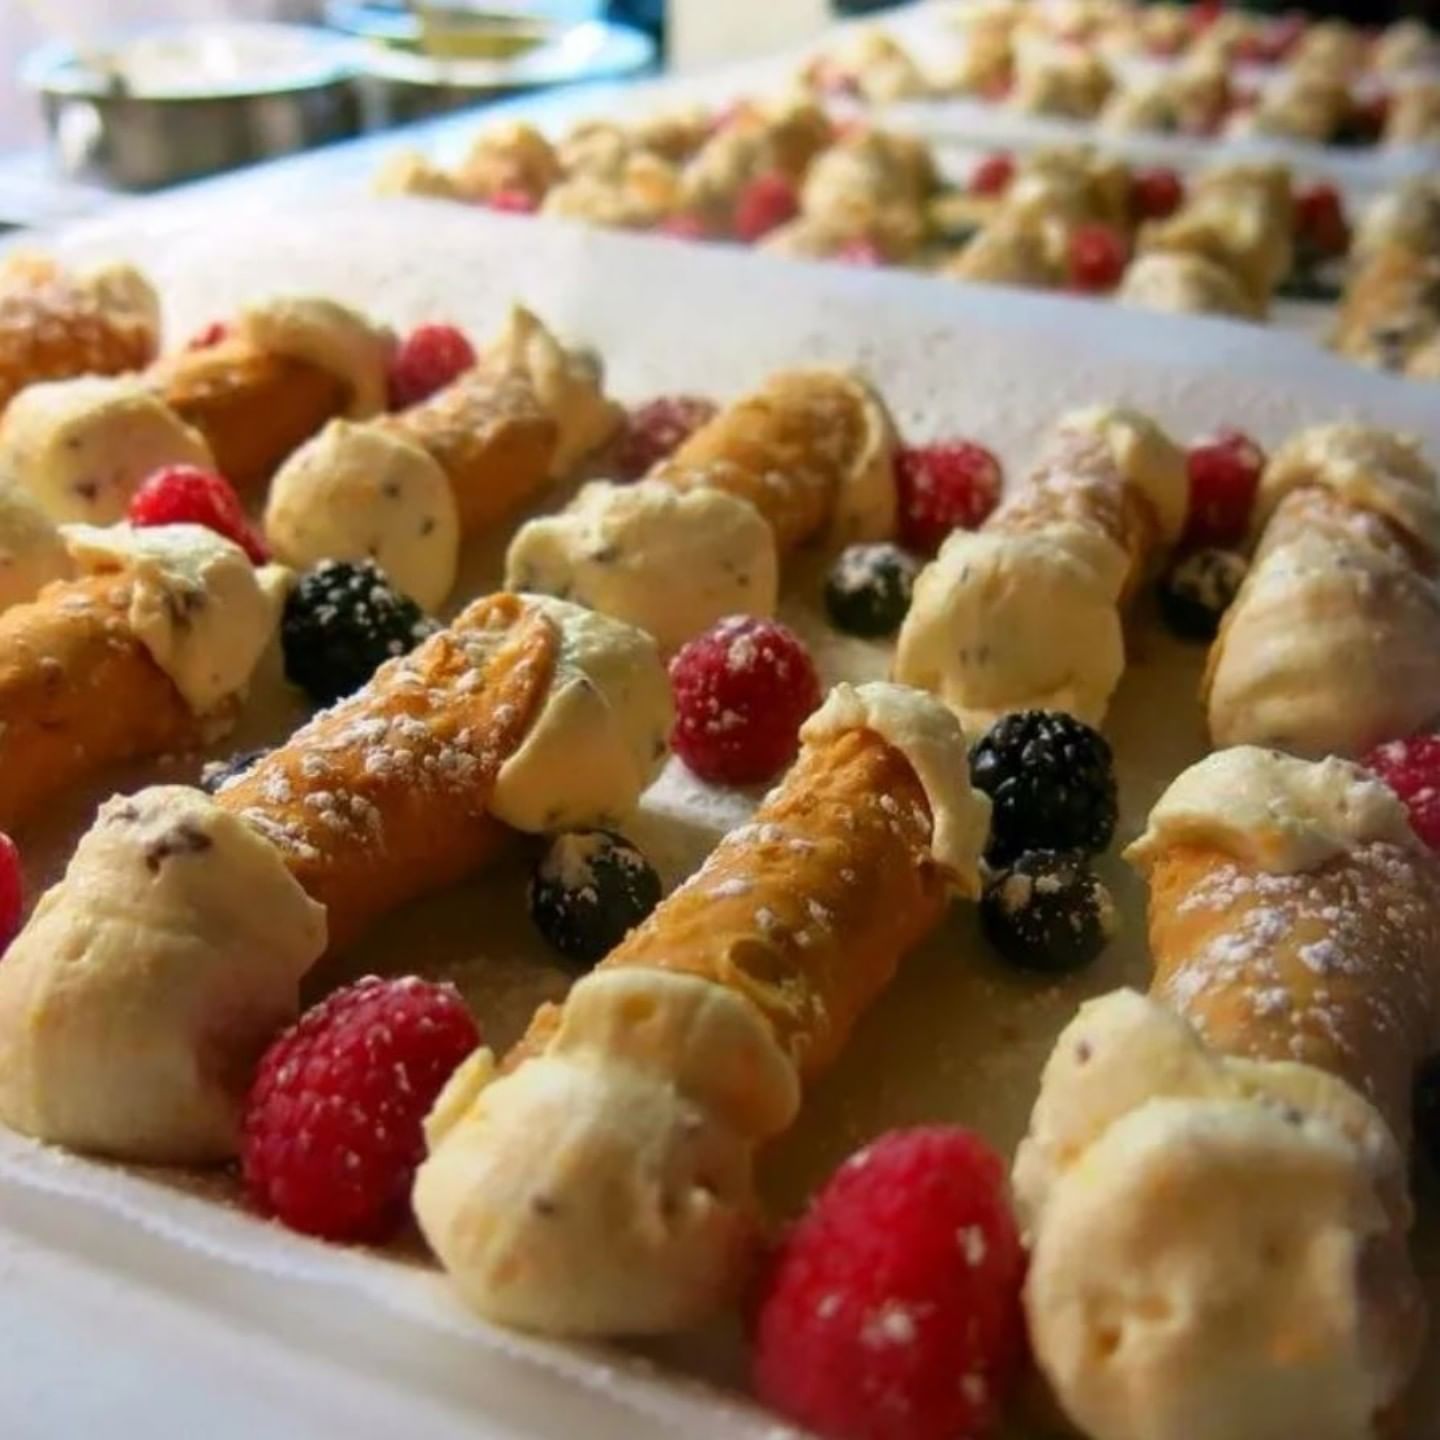 Having a party? We Offer Catering!